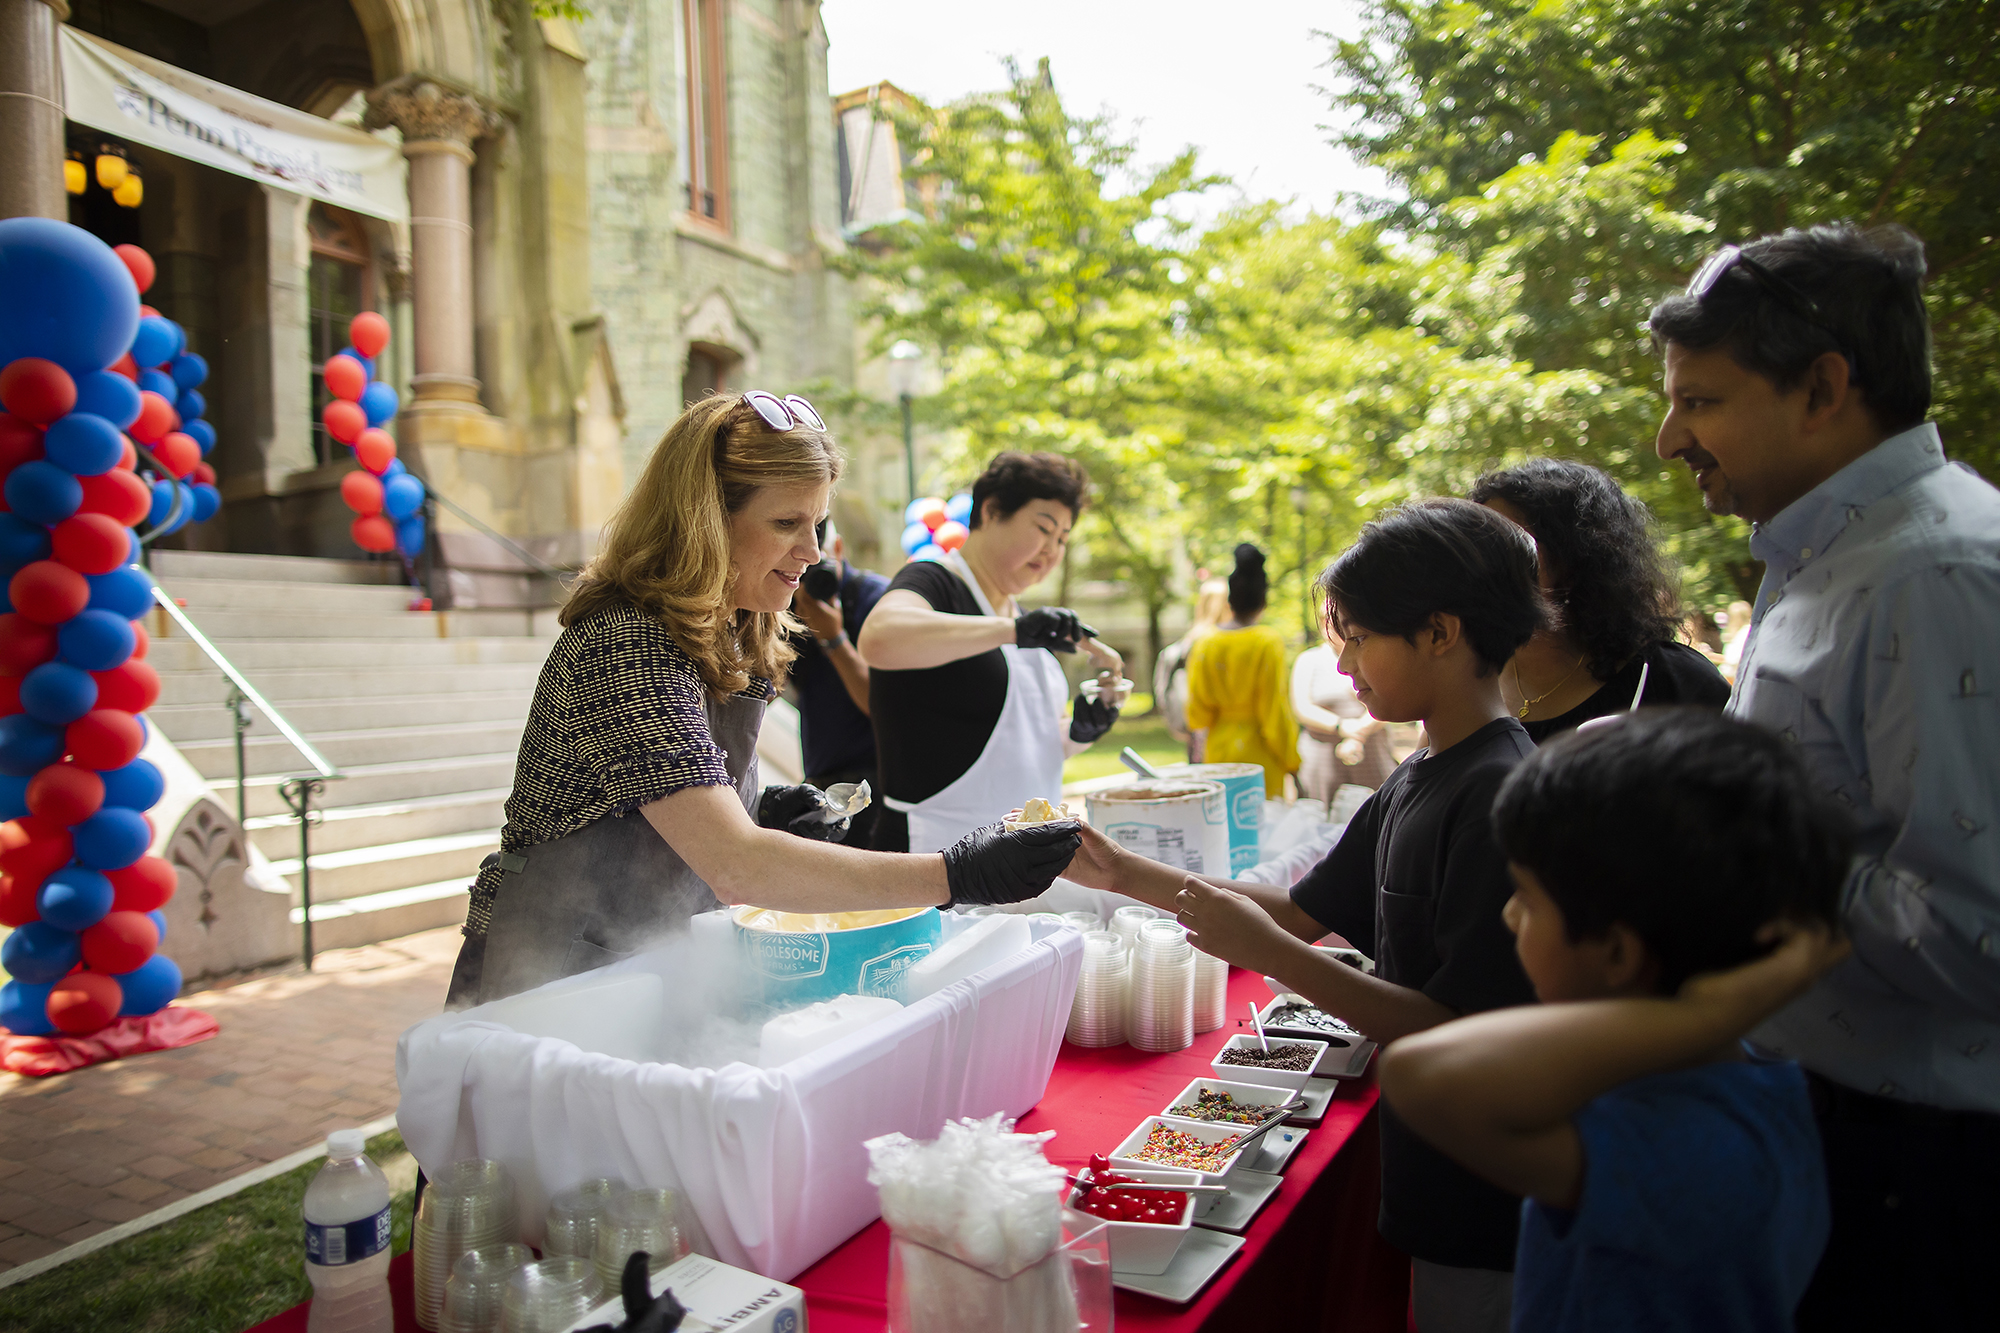 Liz Magill scoops ice cream for a crowd in front of College Hall.